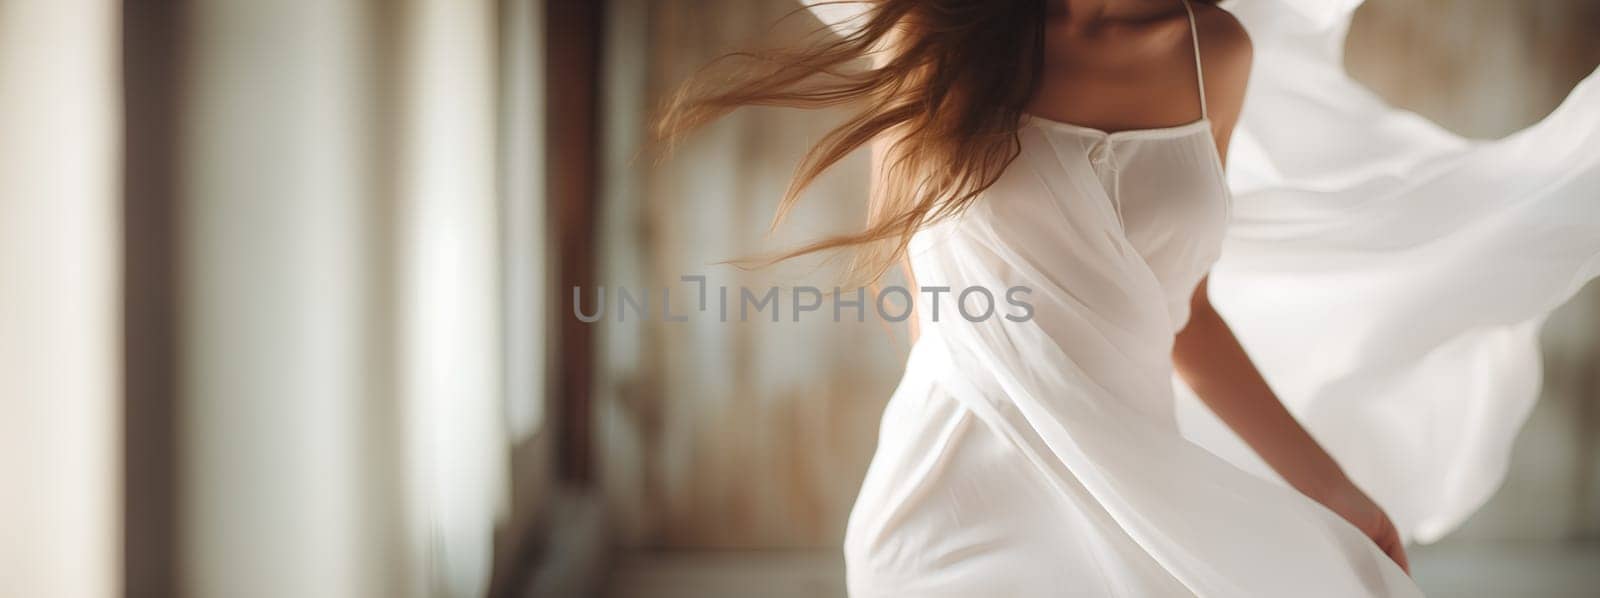 A woman in a flowing white dress dancing in a room by chrisroll